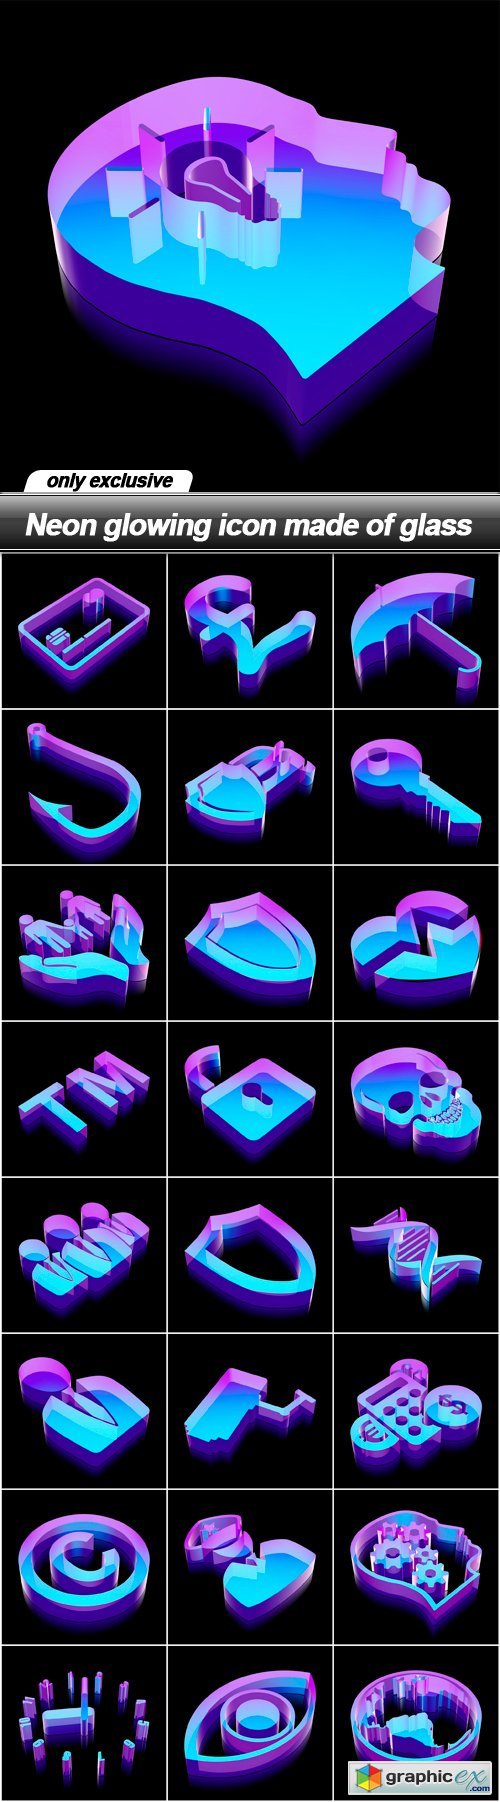 Neon glowing icon made of glass - 49 EPS